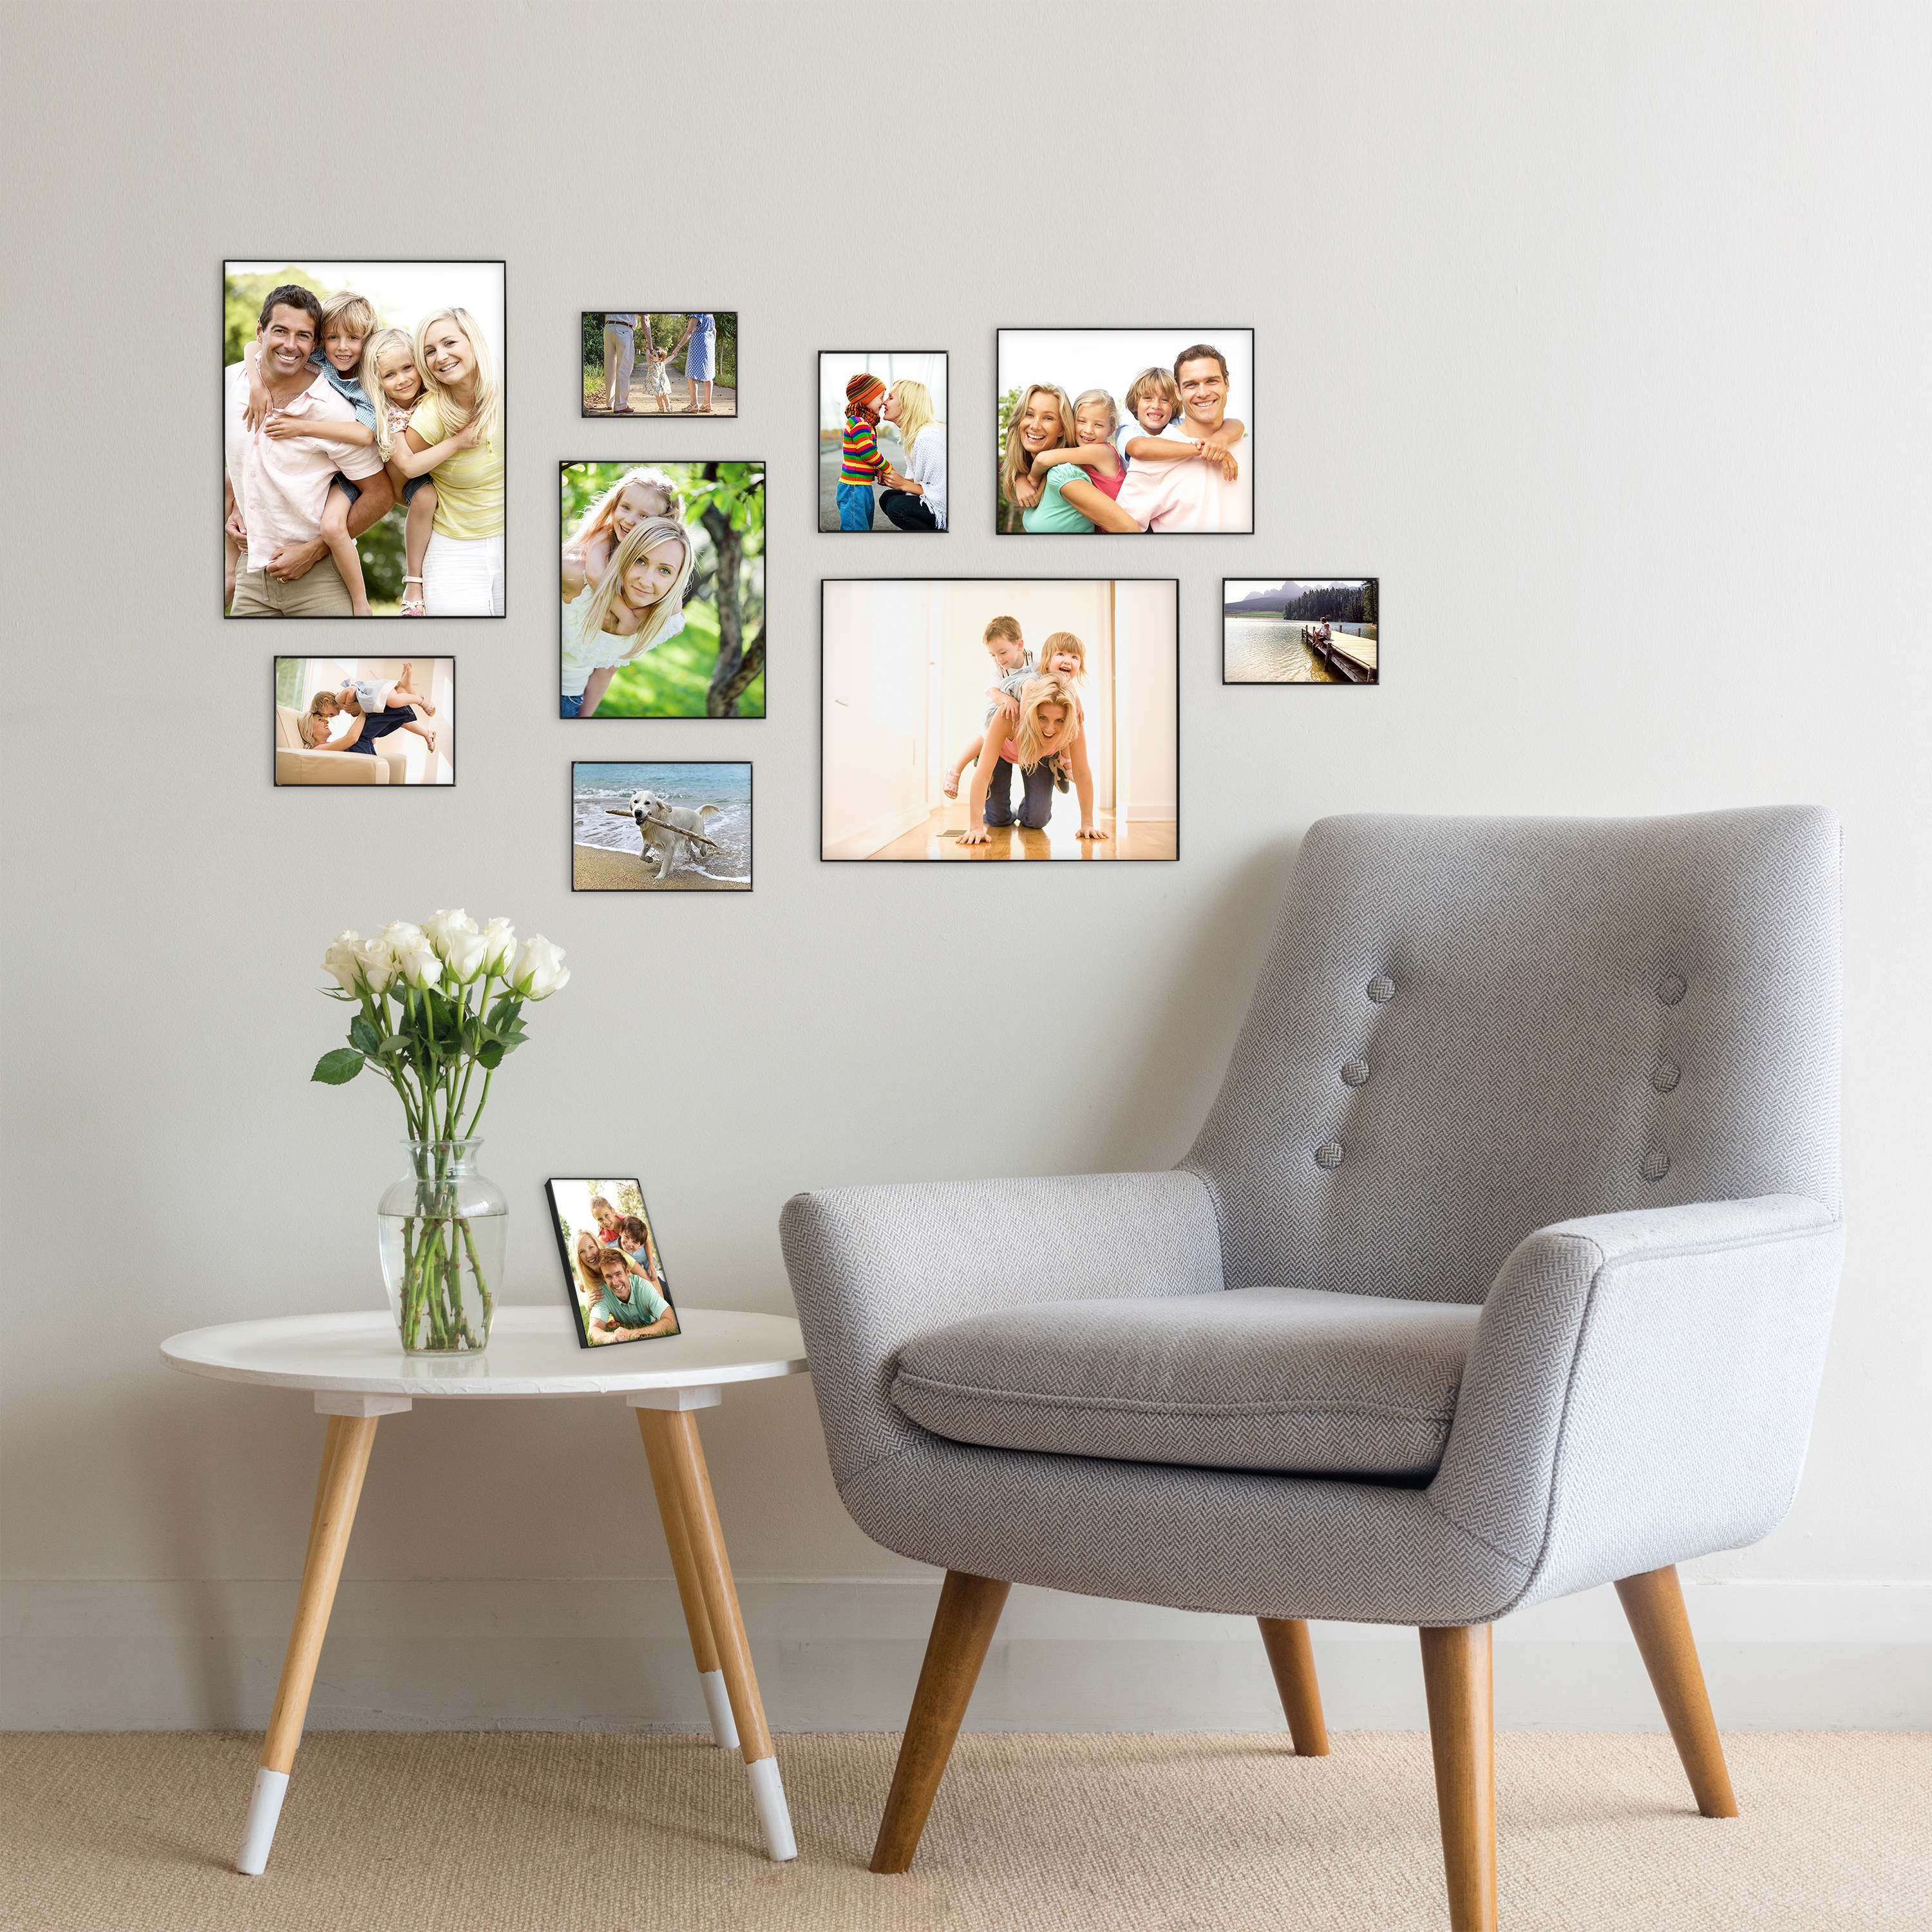 A gallery wall in a home with photos 